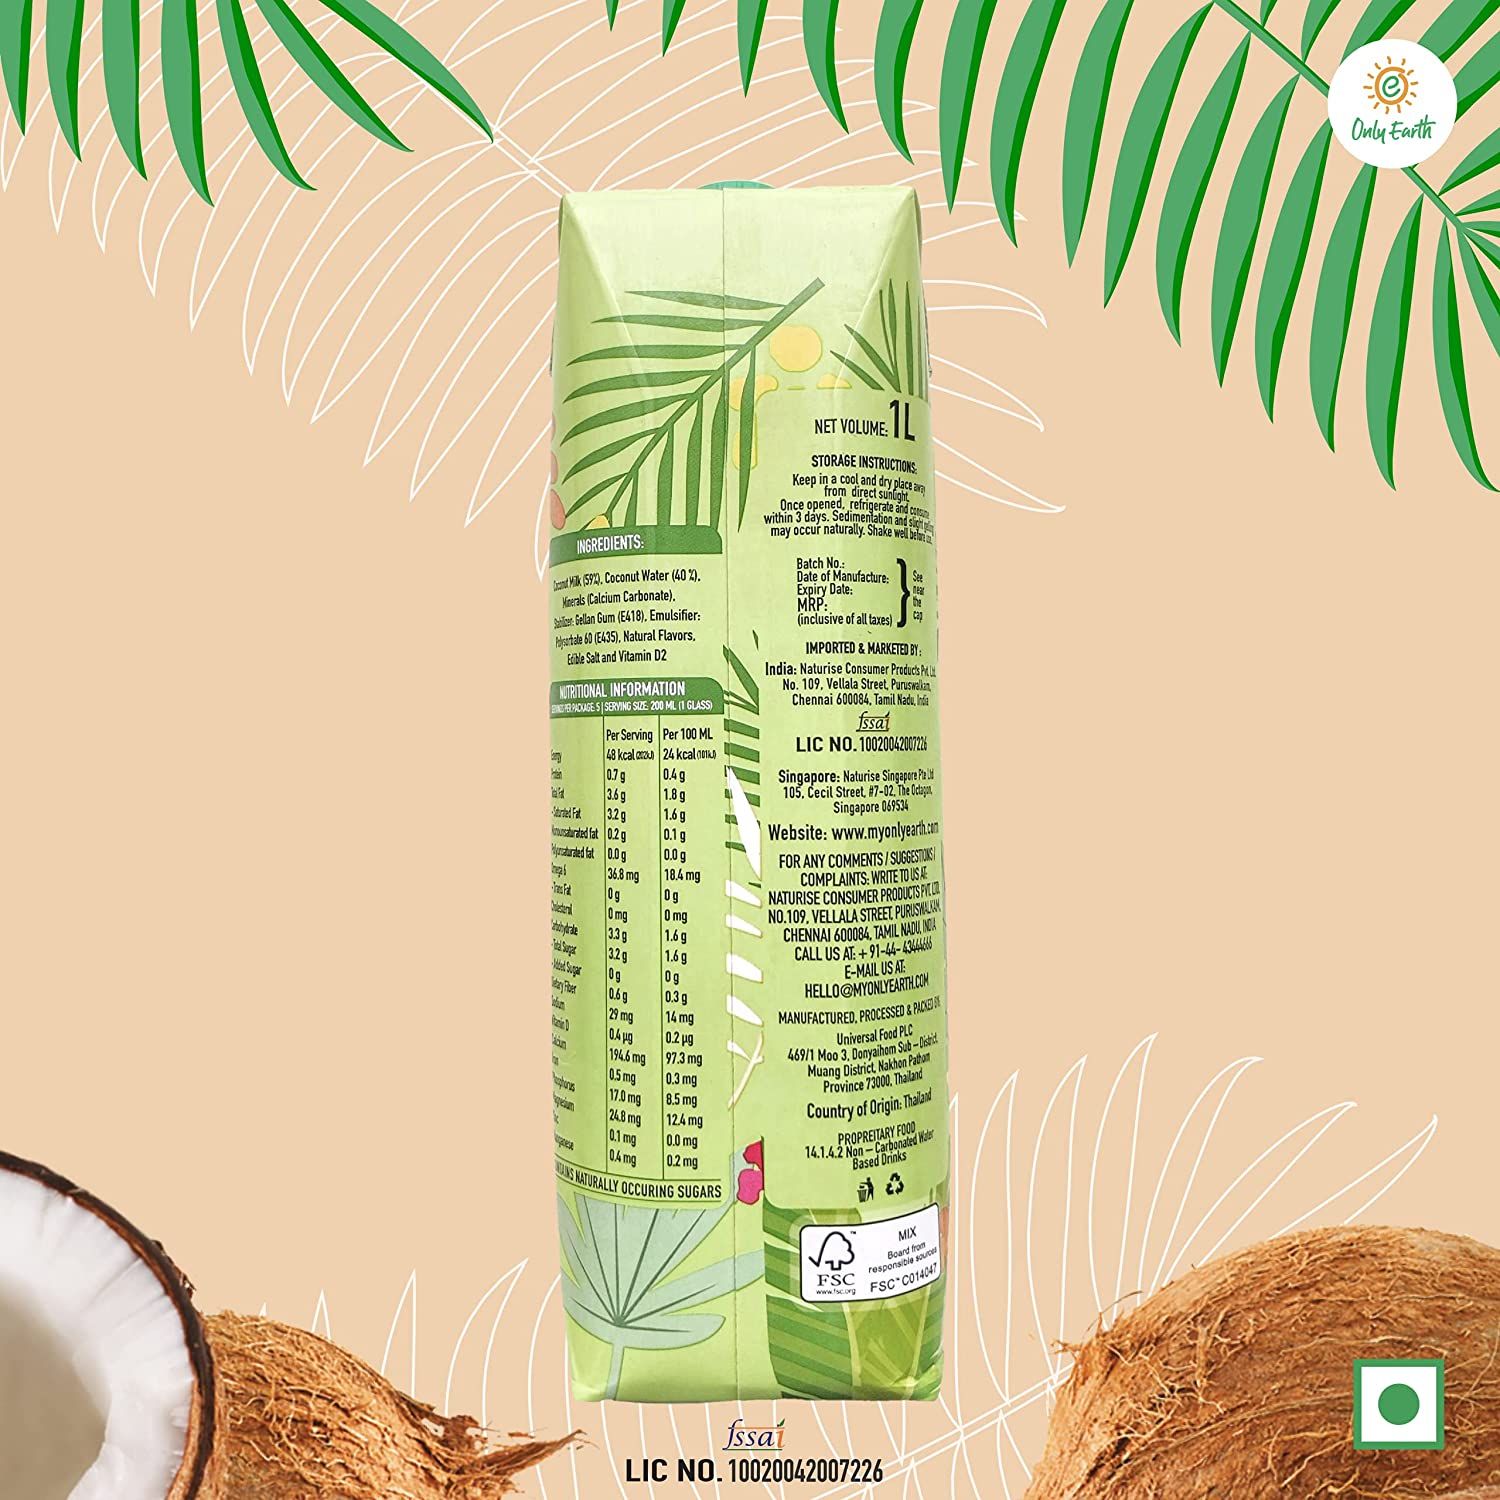 Only Earth Coconut Milk Image